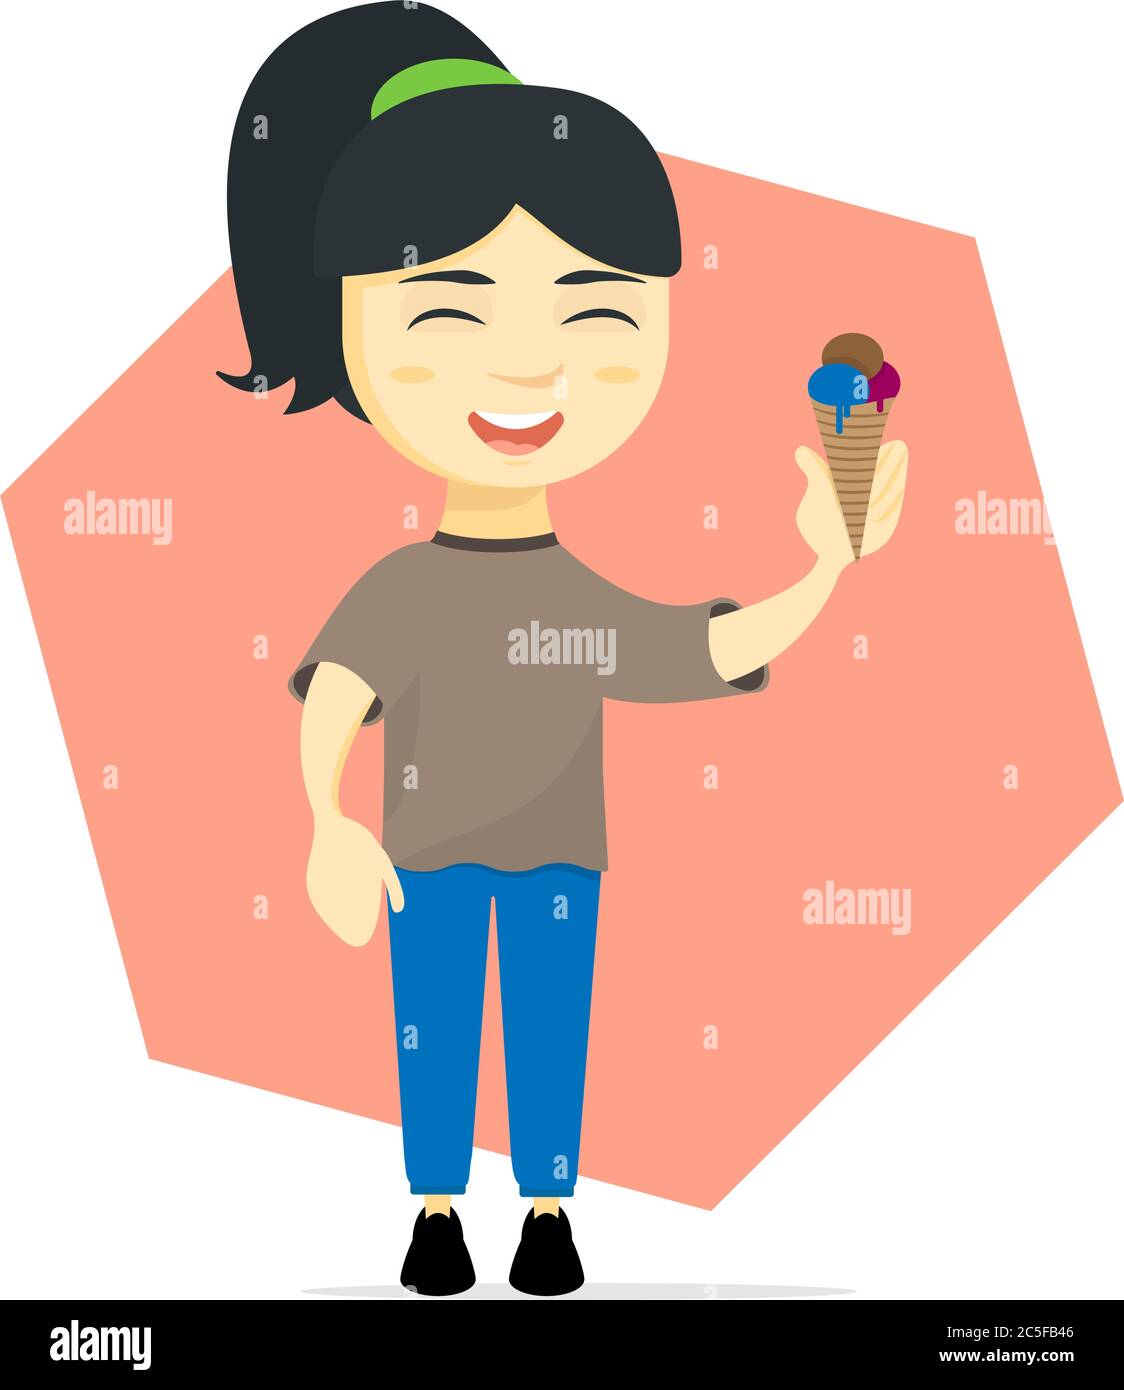 Young joyful woman standing with a big smile and holding ice cream cone illustration Stock Vector